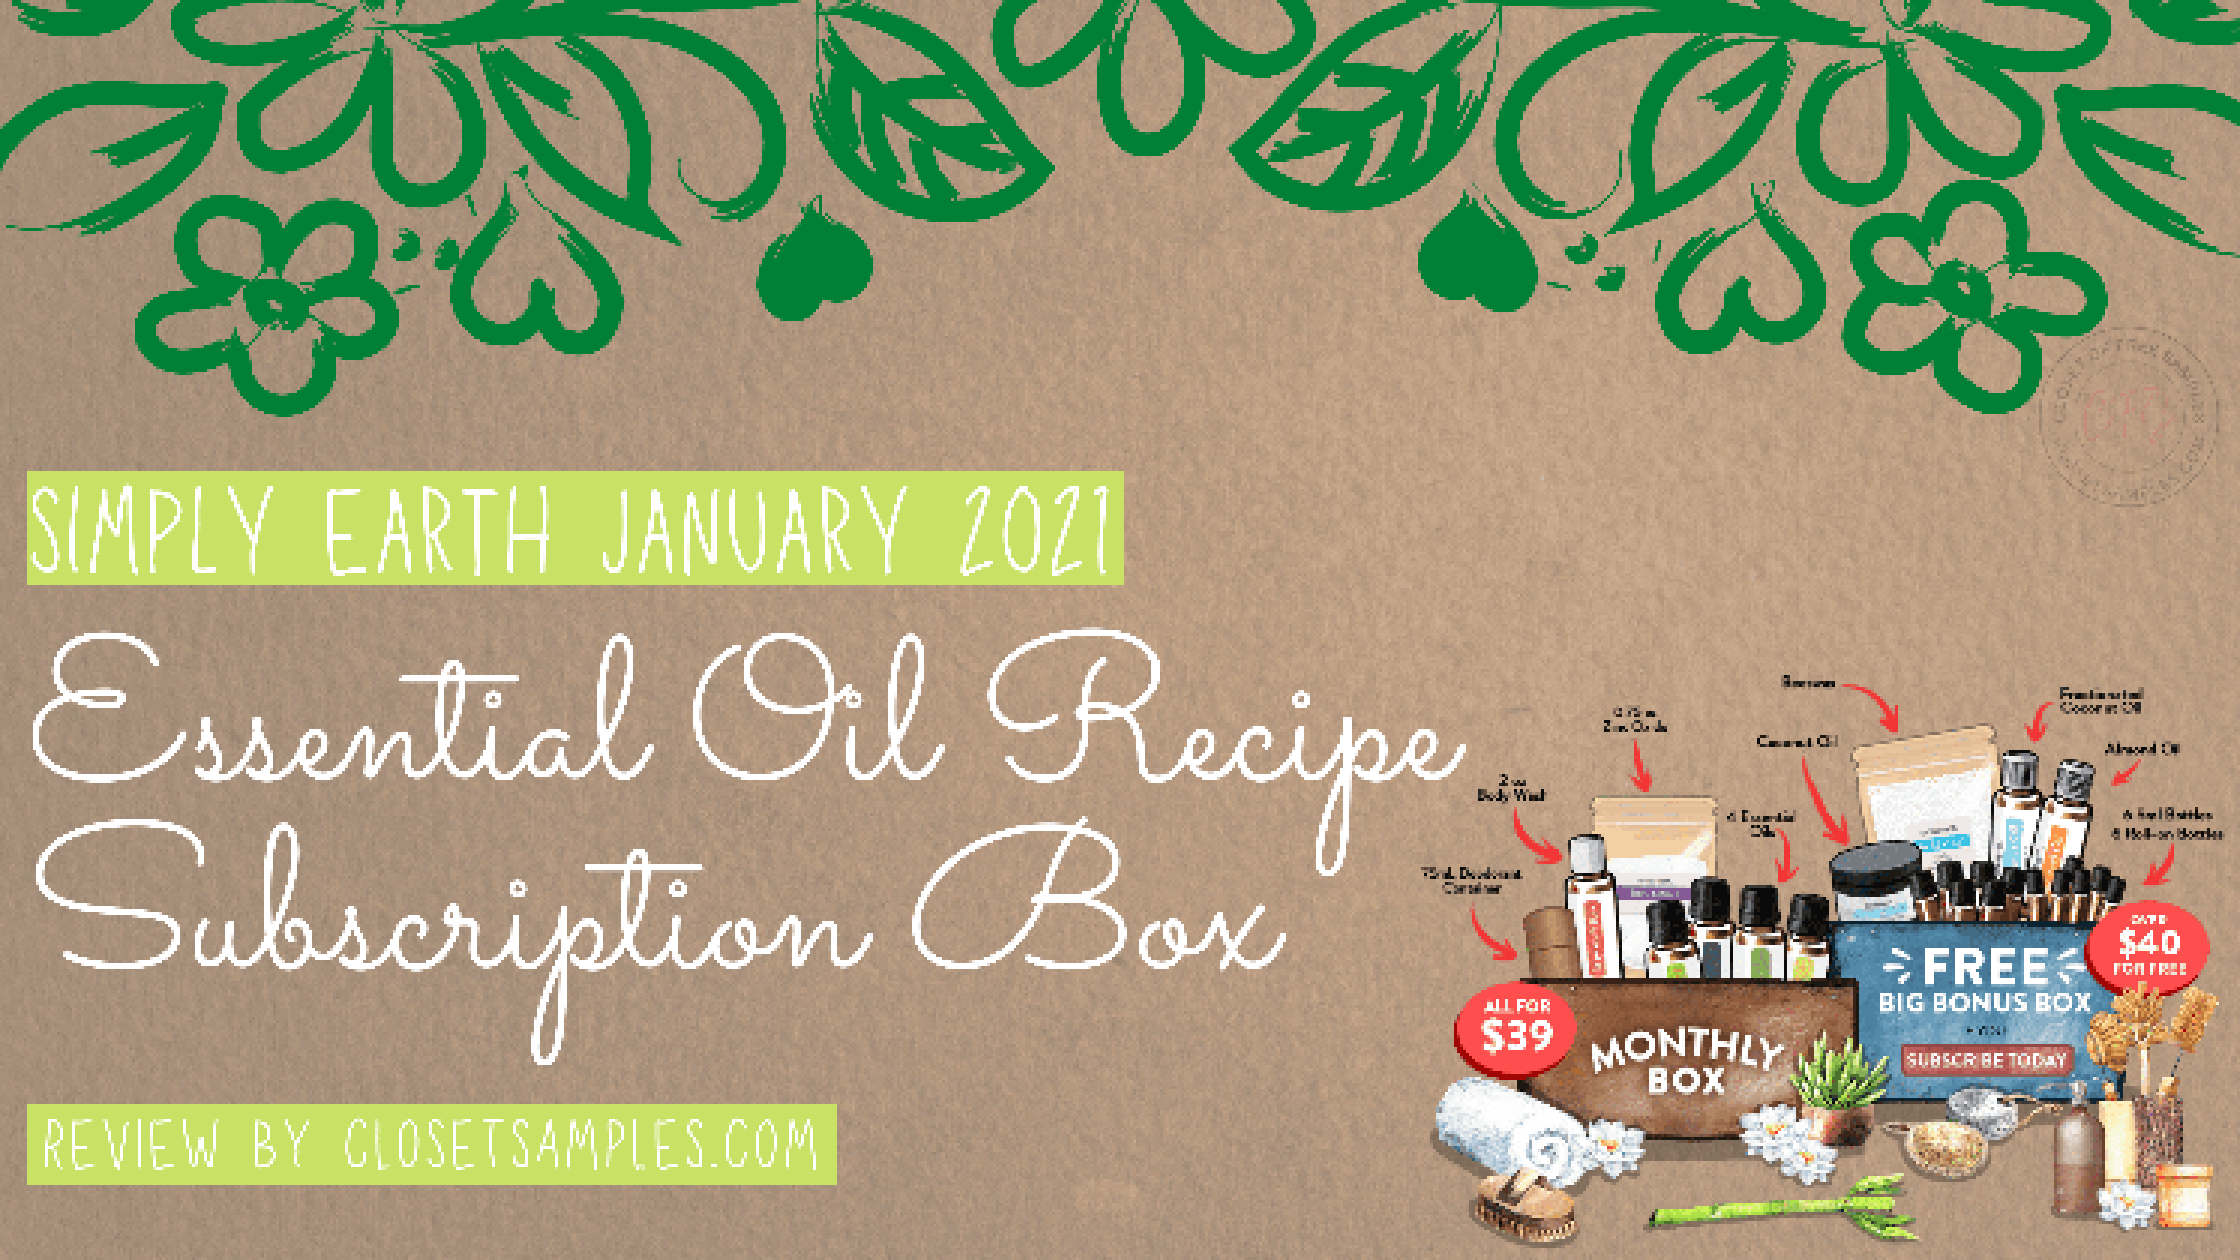 Simply-Earth-January-2021-Essential-Oil-Recipe-Subscription-Box-Review-closetsamples.png